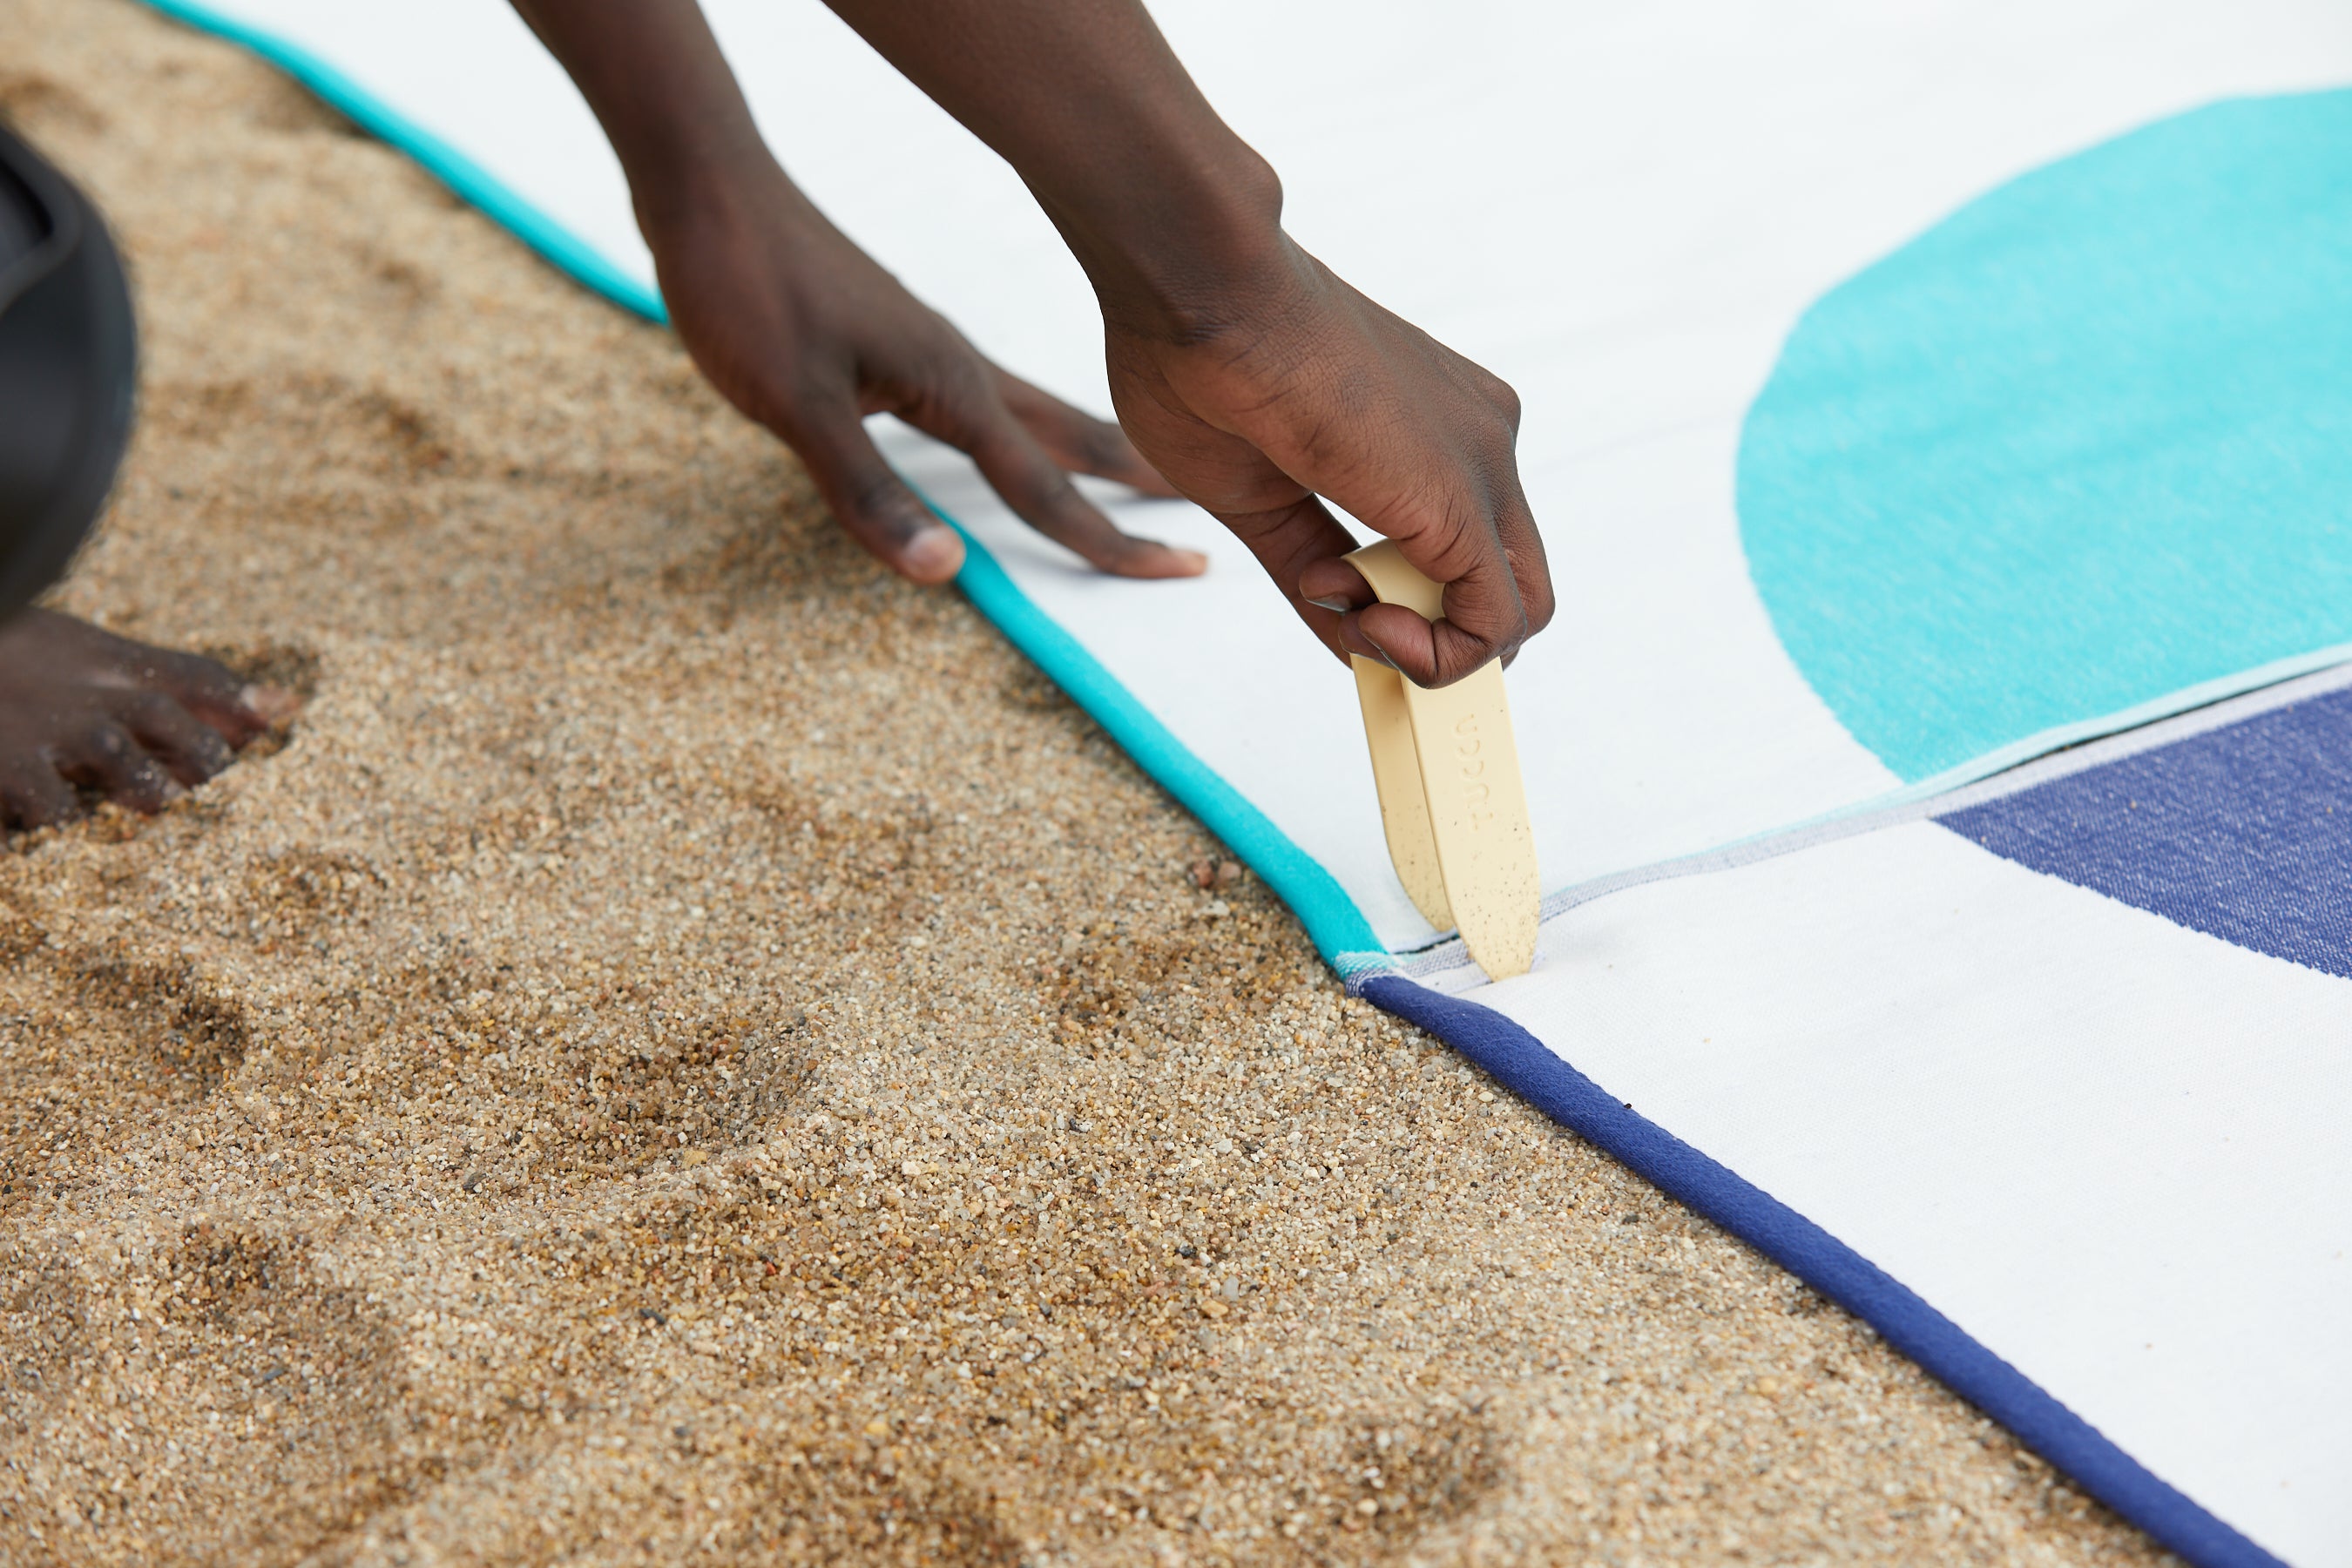 Picture showing how to fix your beach towels into the sand so they don't get blown away by the wind. Inserting the Tucca pin through the corners of the premium light beach towels Florida and Mayeri styles. This way both beach towels can be connected 